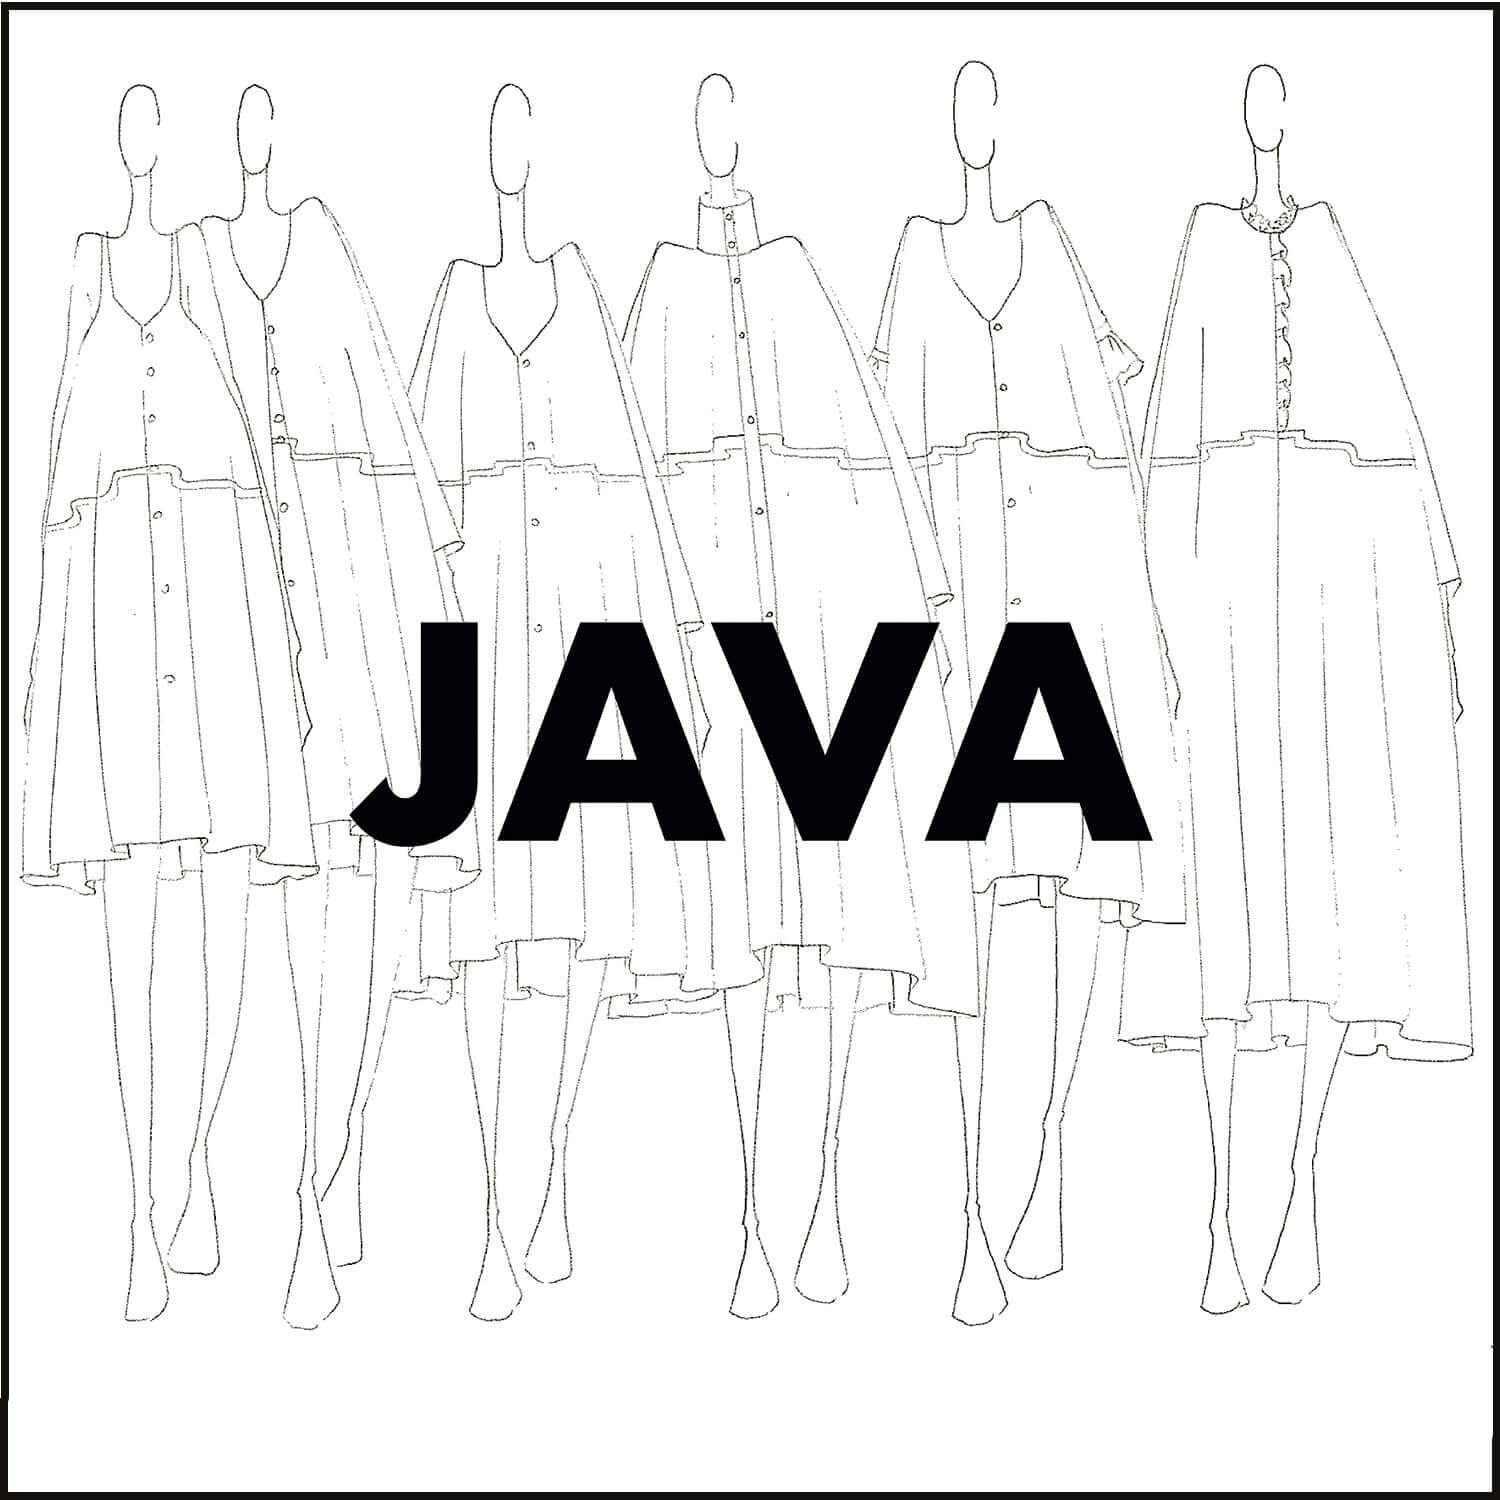 Learn more about... the Java dress